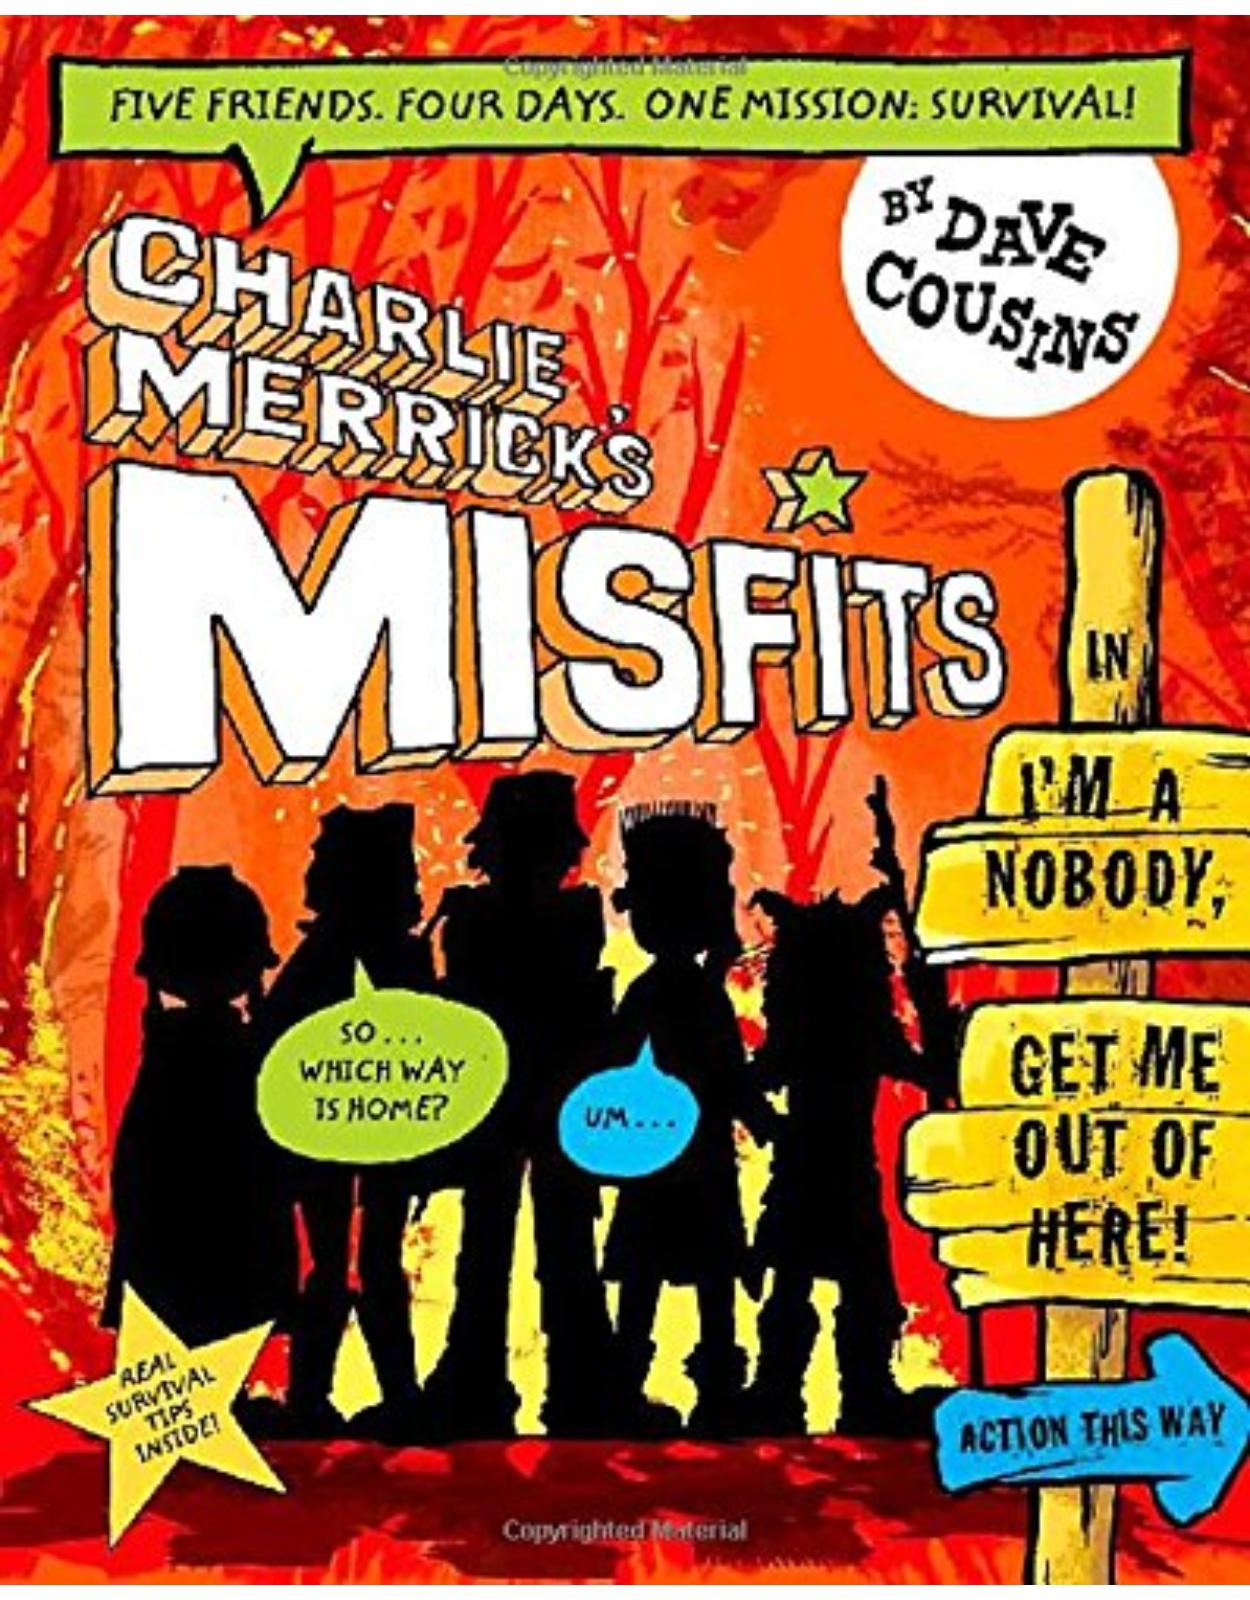 Charlie Merrick's Misfits in I'm a Nobody, Get Me Out of Here! 